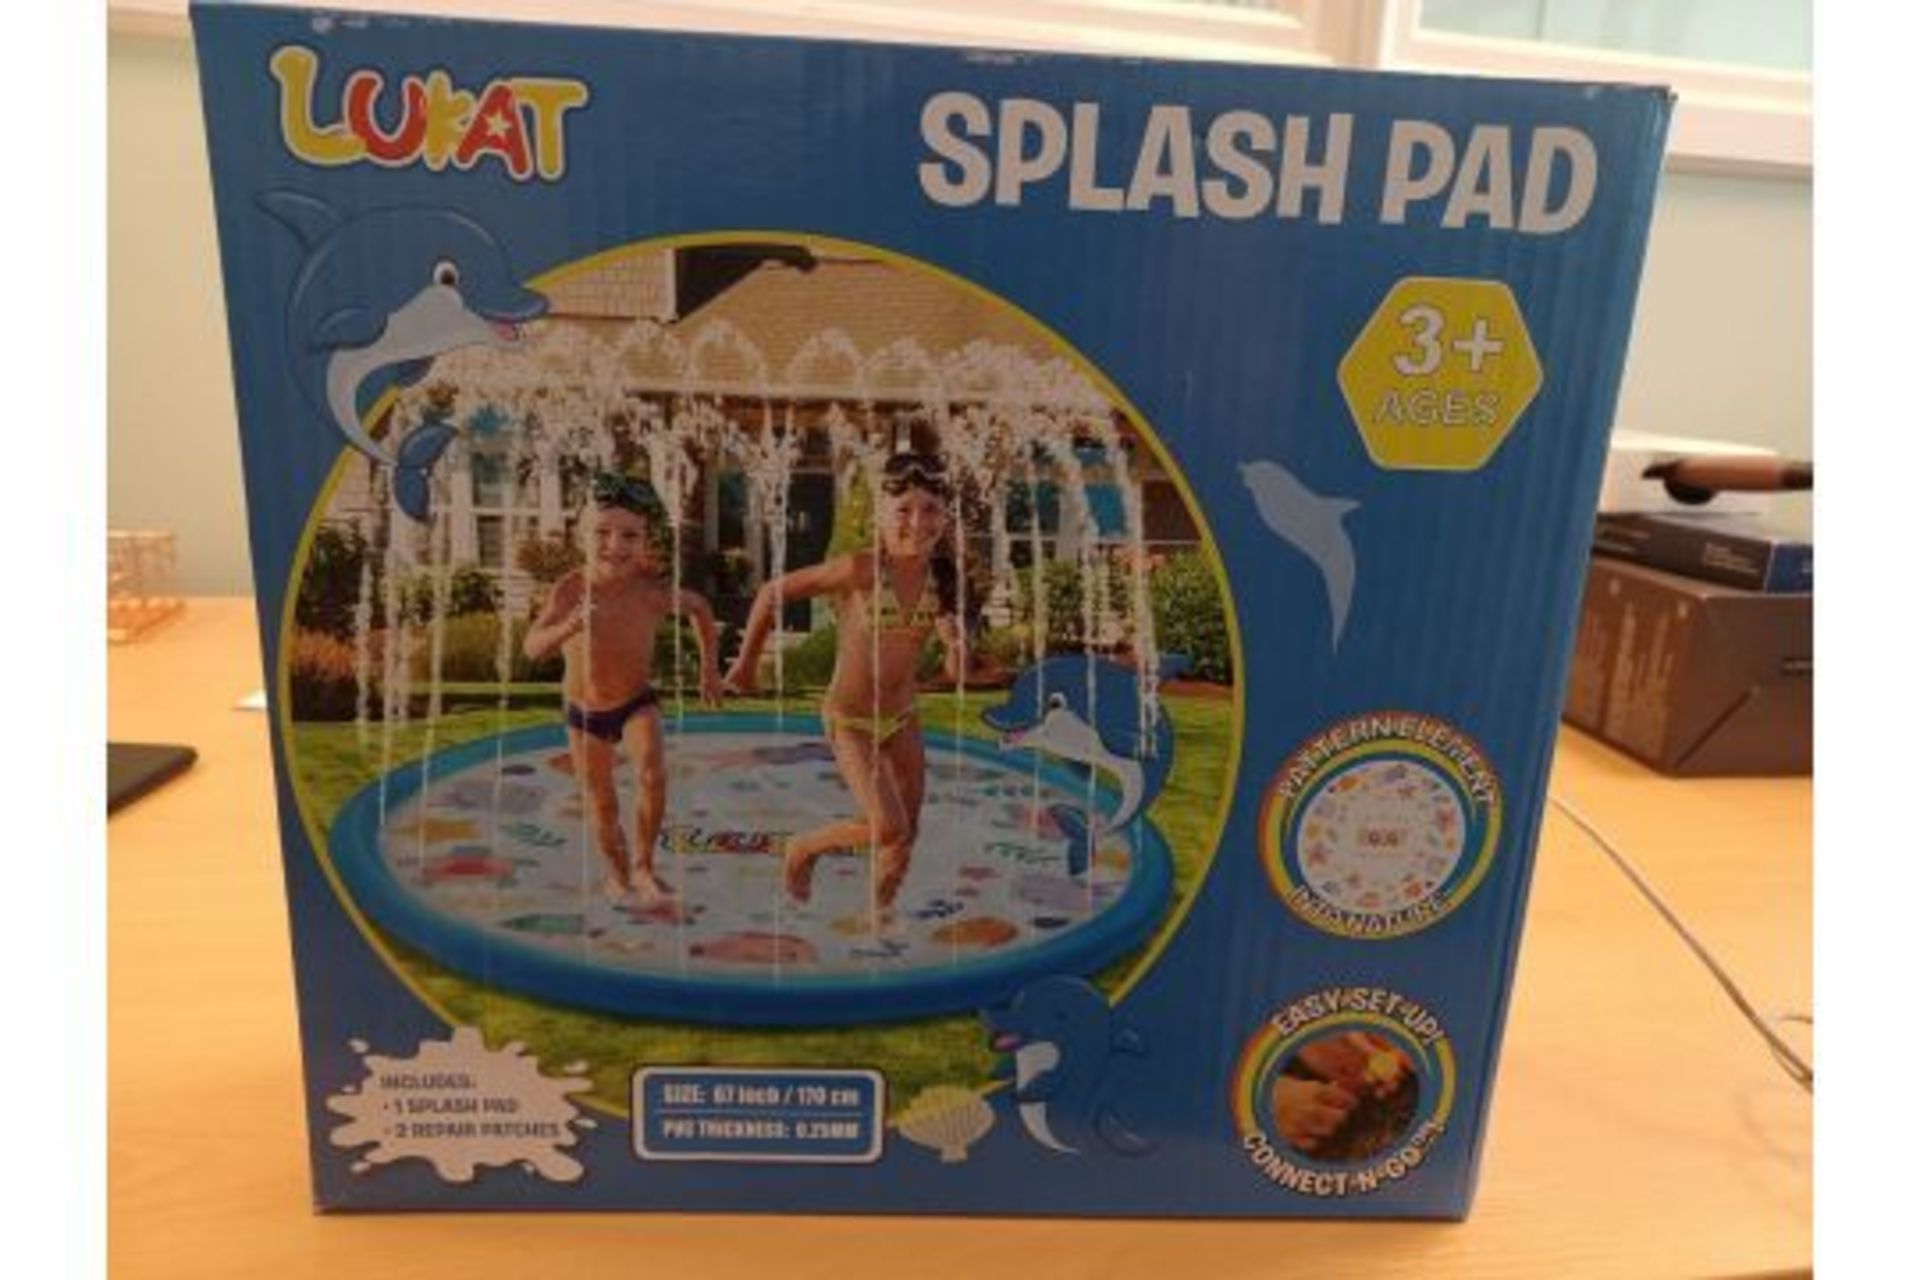 3 X NEW BOXED LUKAT SPLASH PAD PADDLING POOL. EASY SET UP - CONNECT N GO! (ROW9)